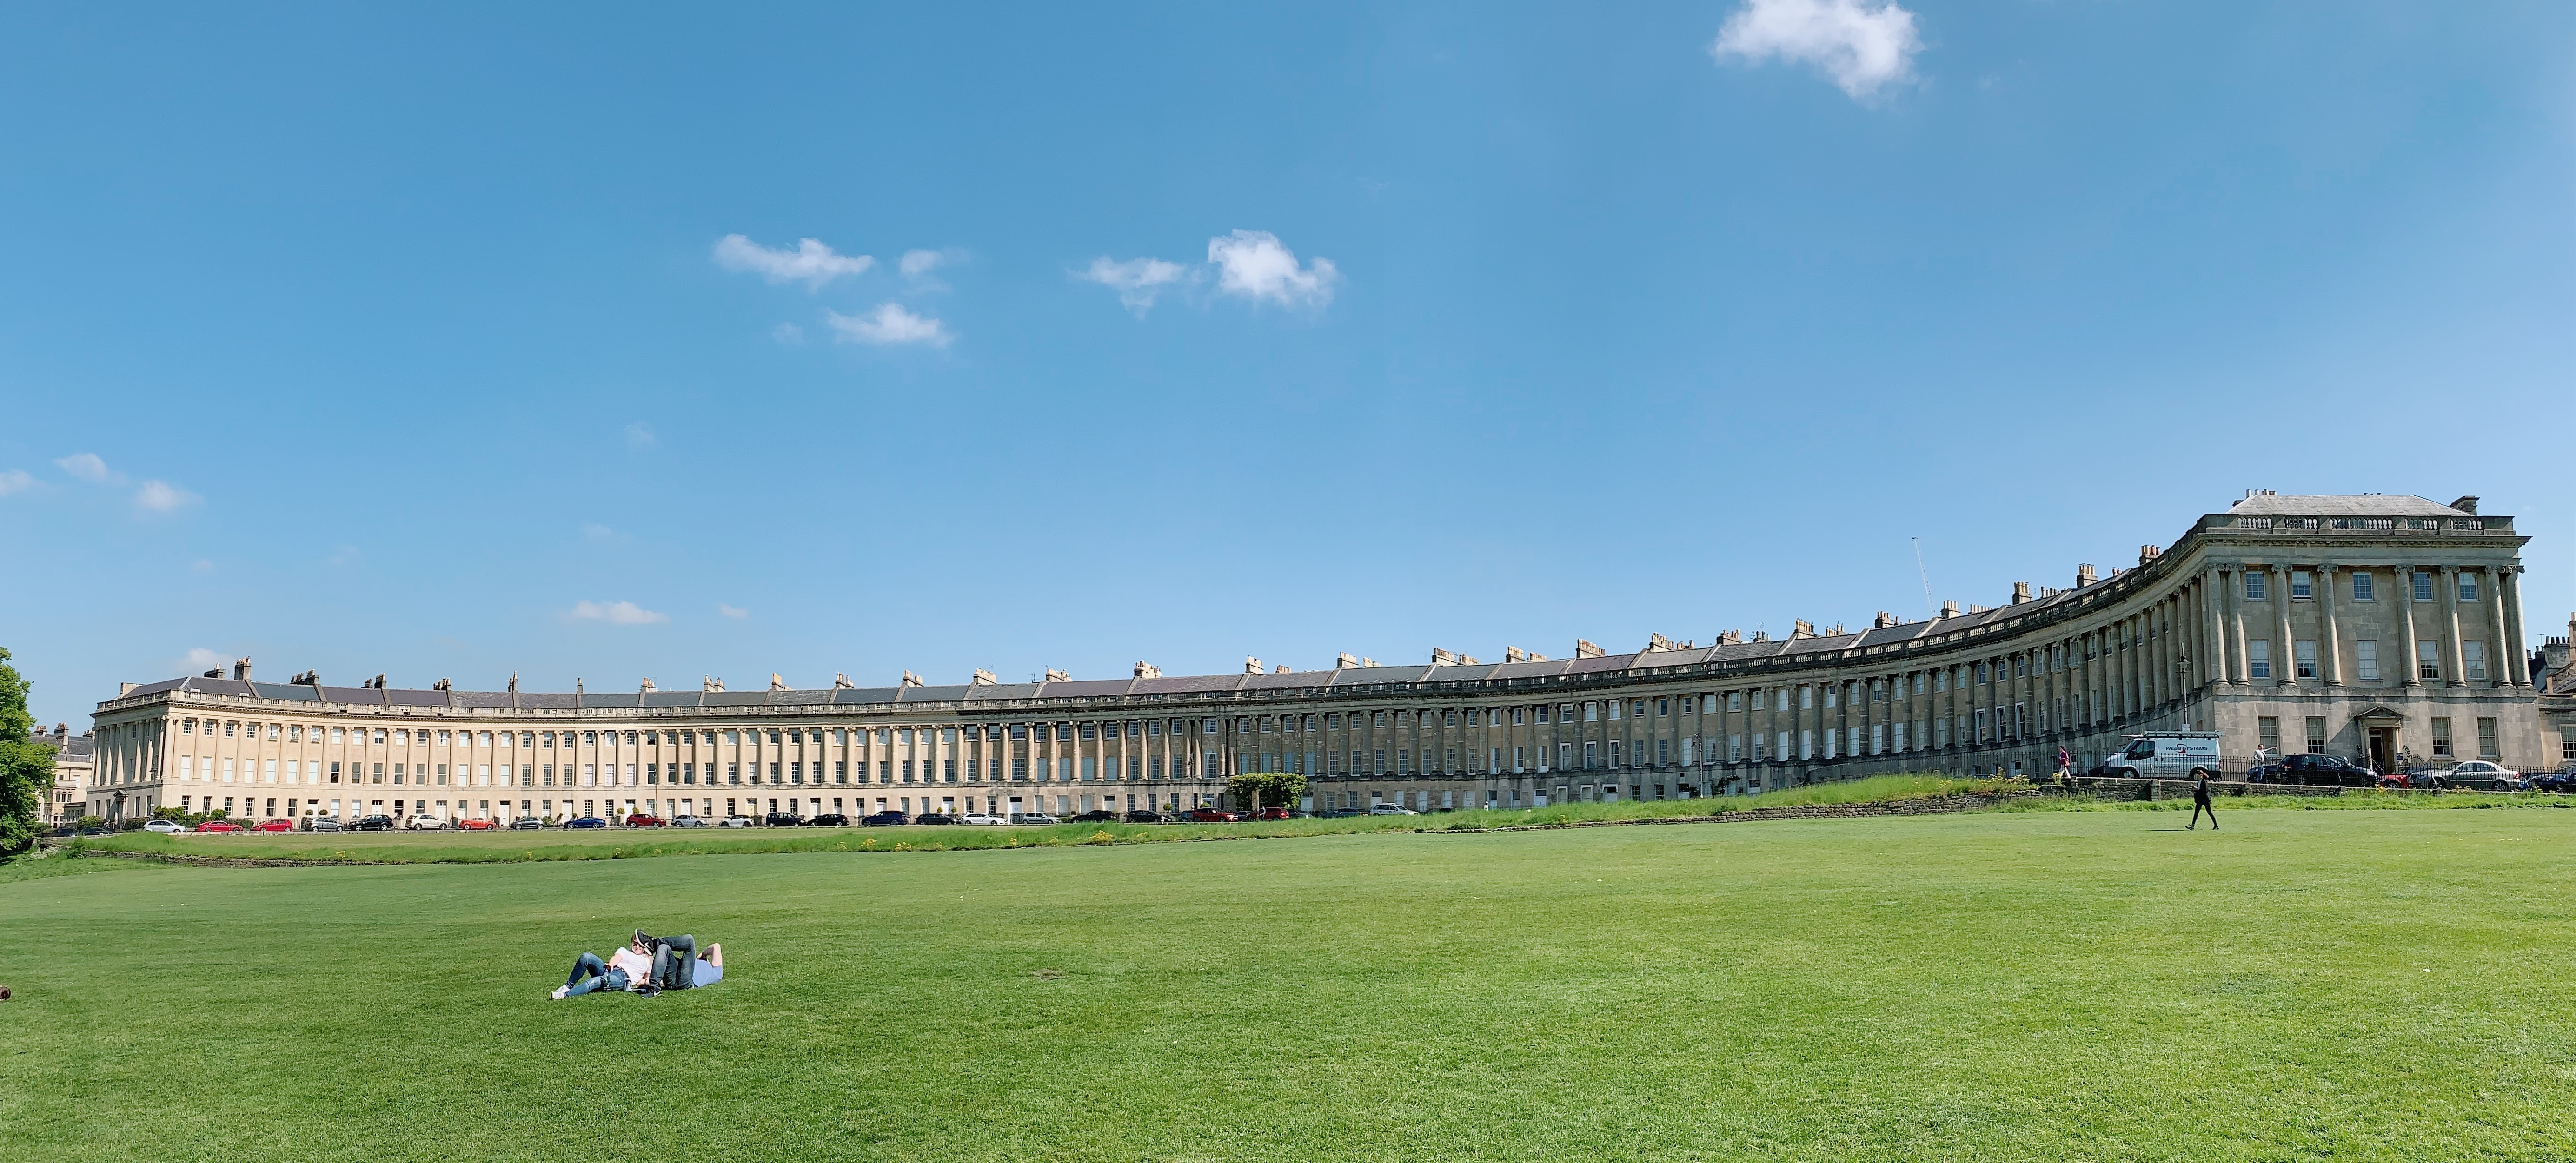 The Royal Crescent in Bath, England